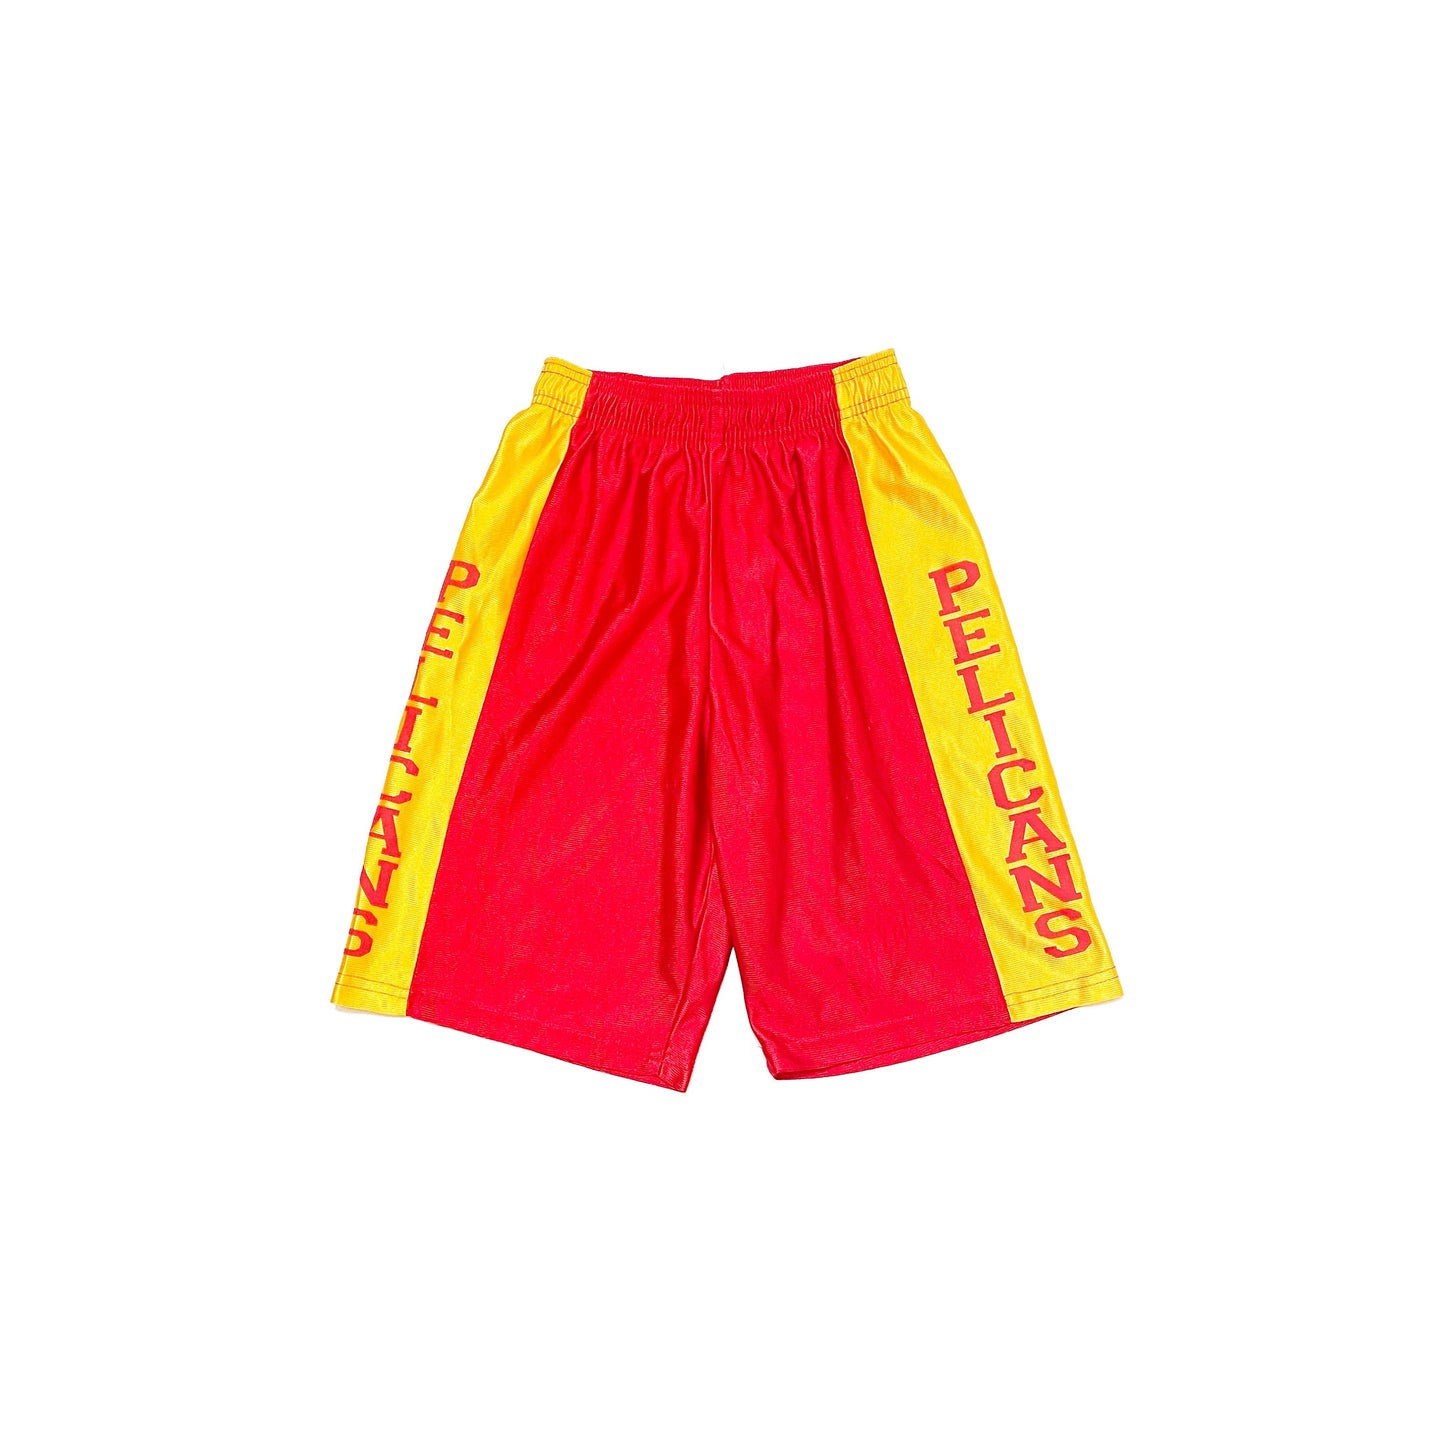 90's New Orleans Pelicans Basketball Shorts - 8-10yr